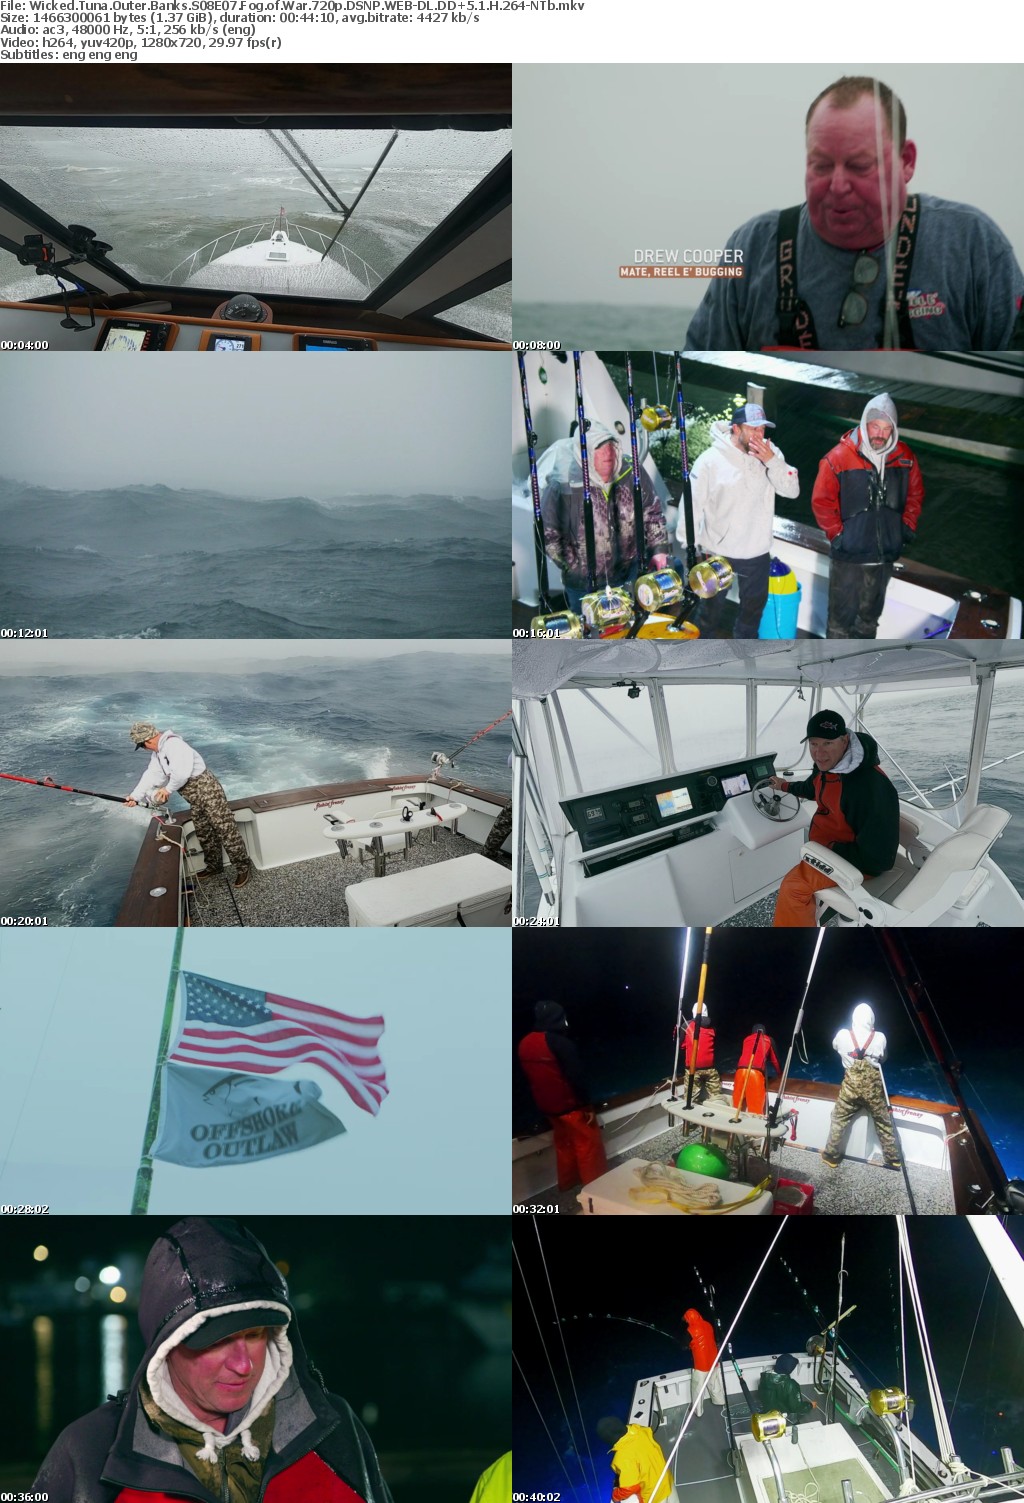 Wicked Tuna Outer Banks S08E07 Fog of War 720p DSNP WEBRip DDP5 1 x264-NTb